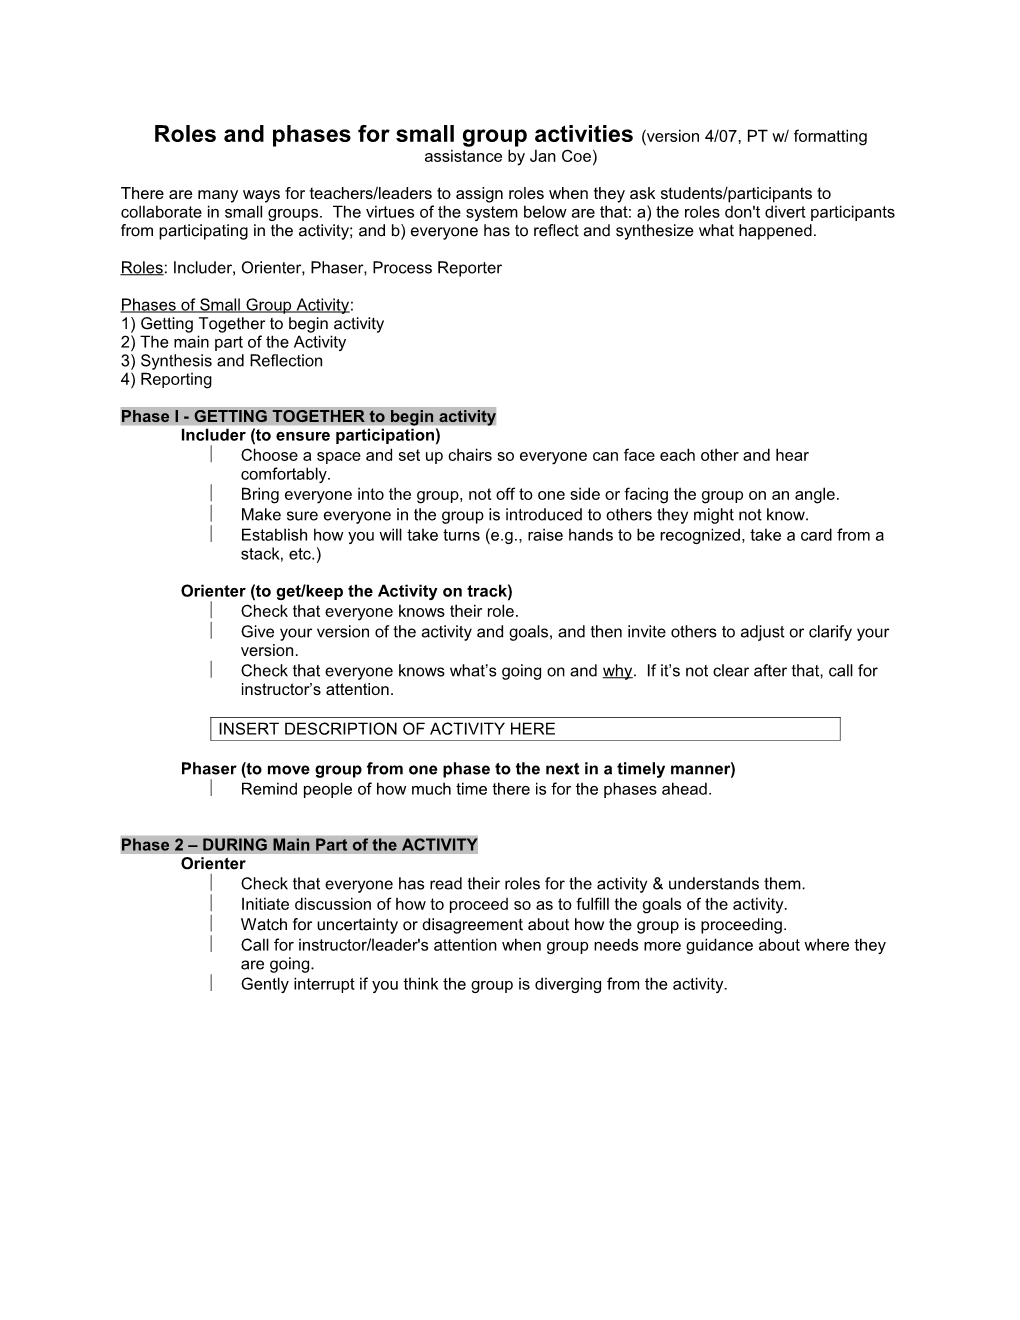 Roles and Phases for Small Group Activities (Version 3/06)